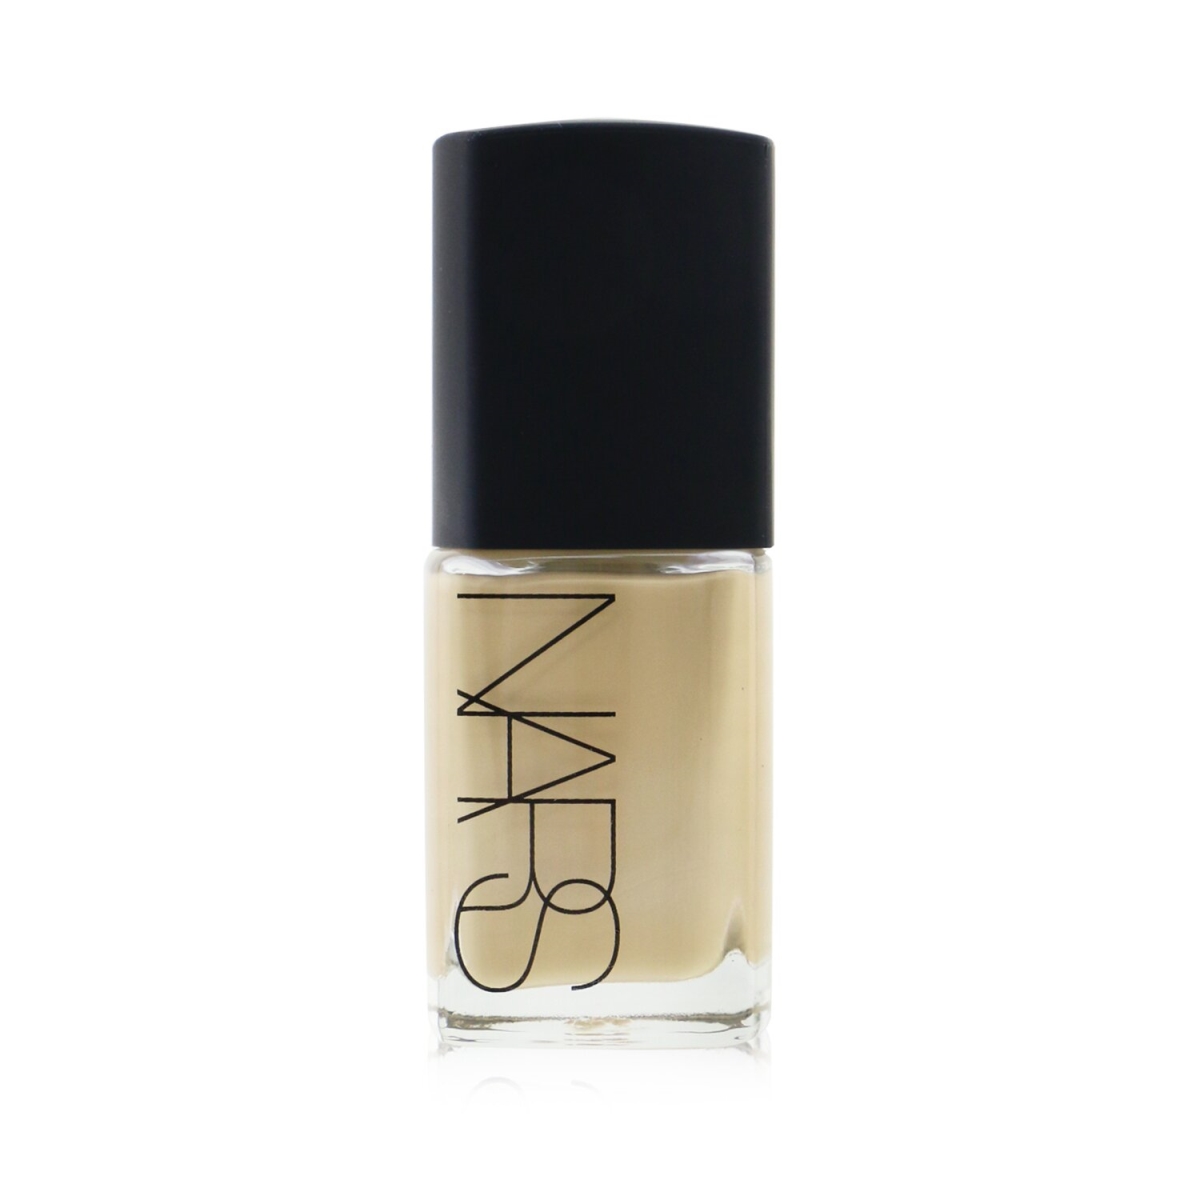 Picture of Nars 258928 1 oz Sheer Glow Foundation - Vienna Light 4.5